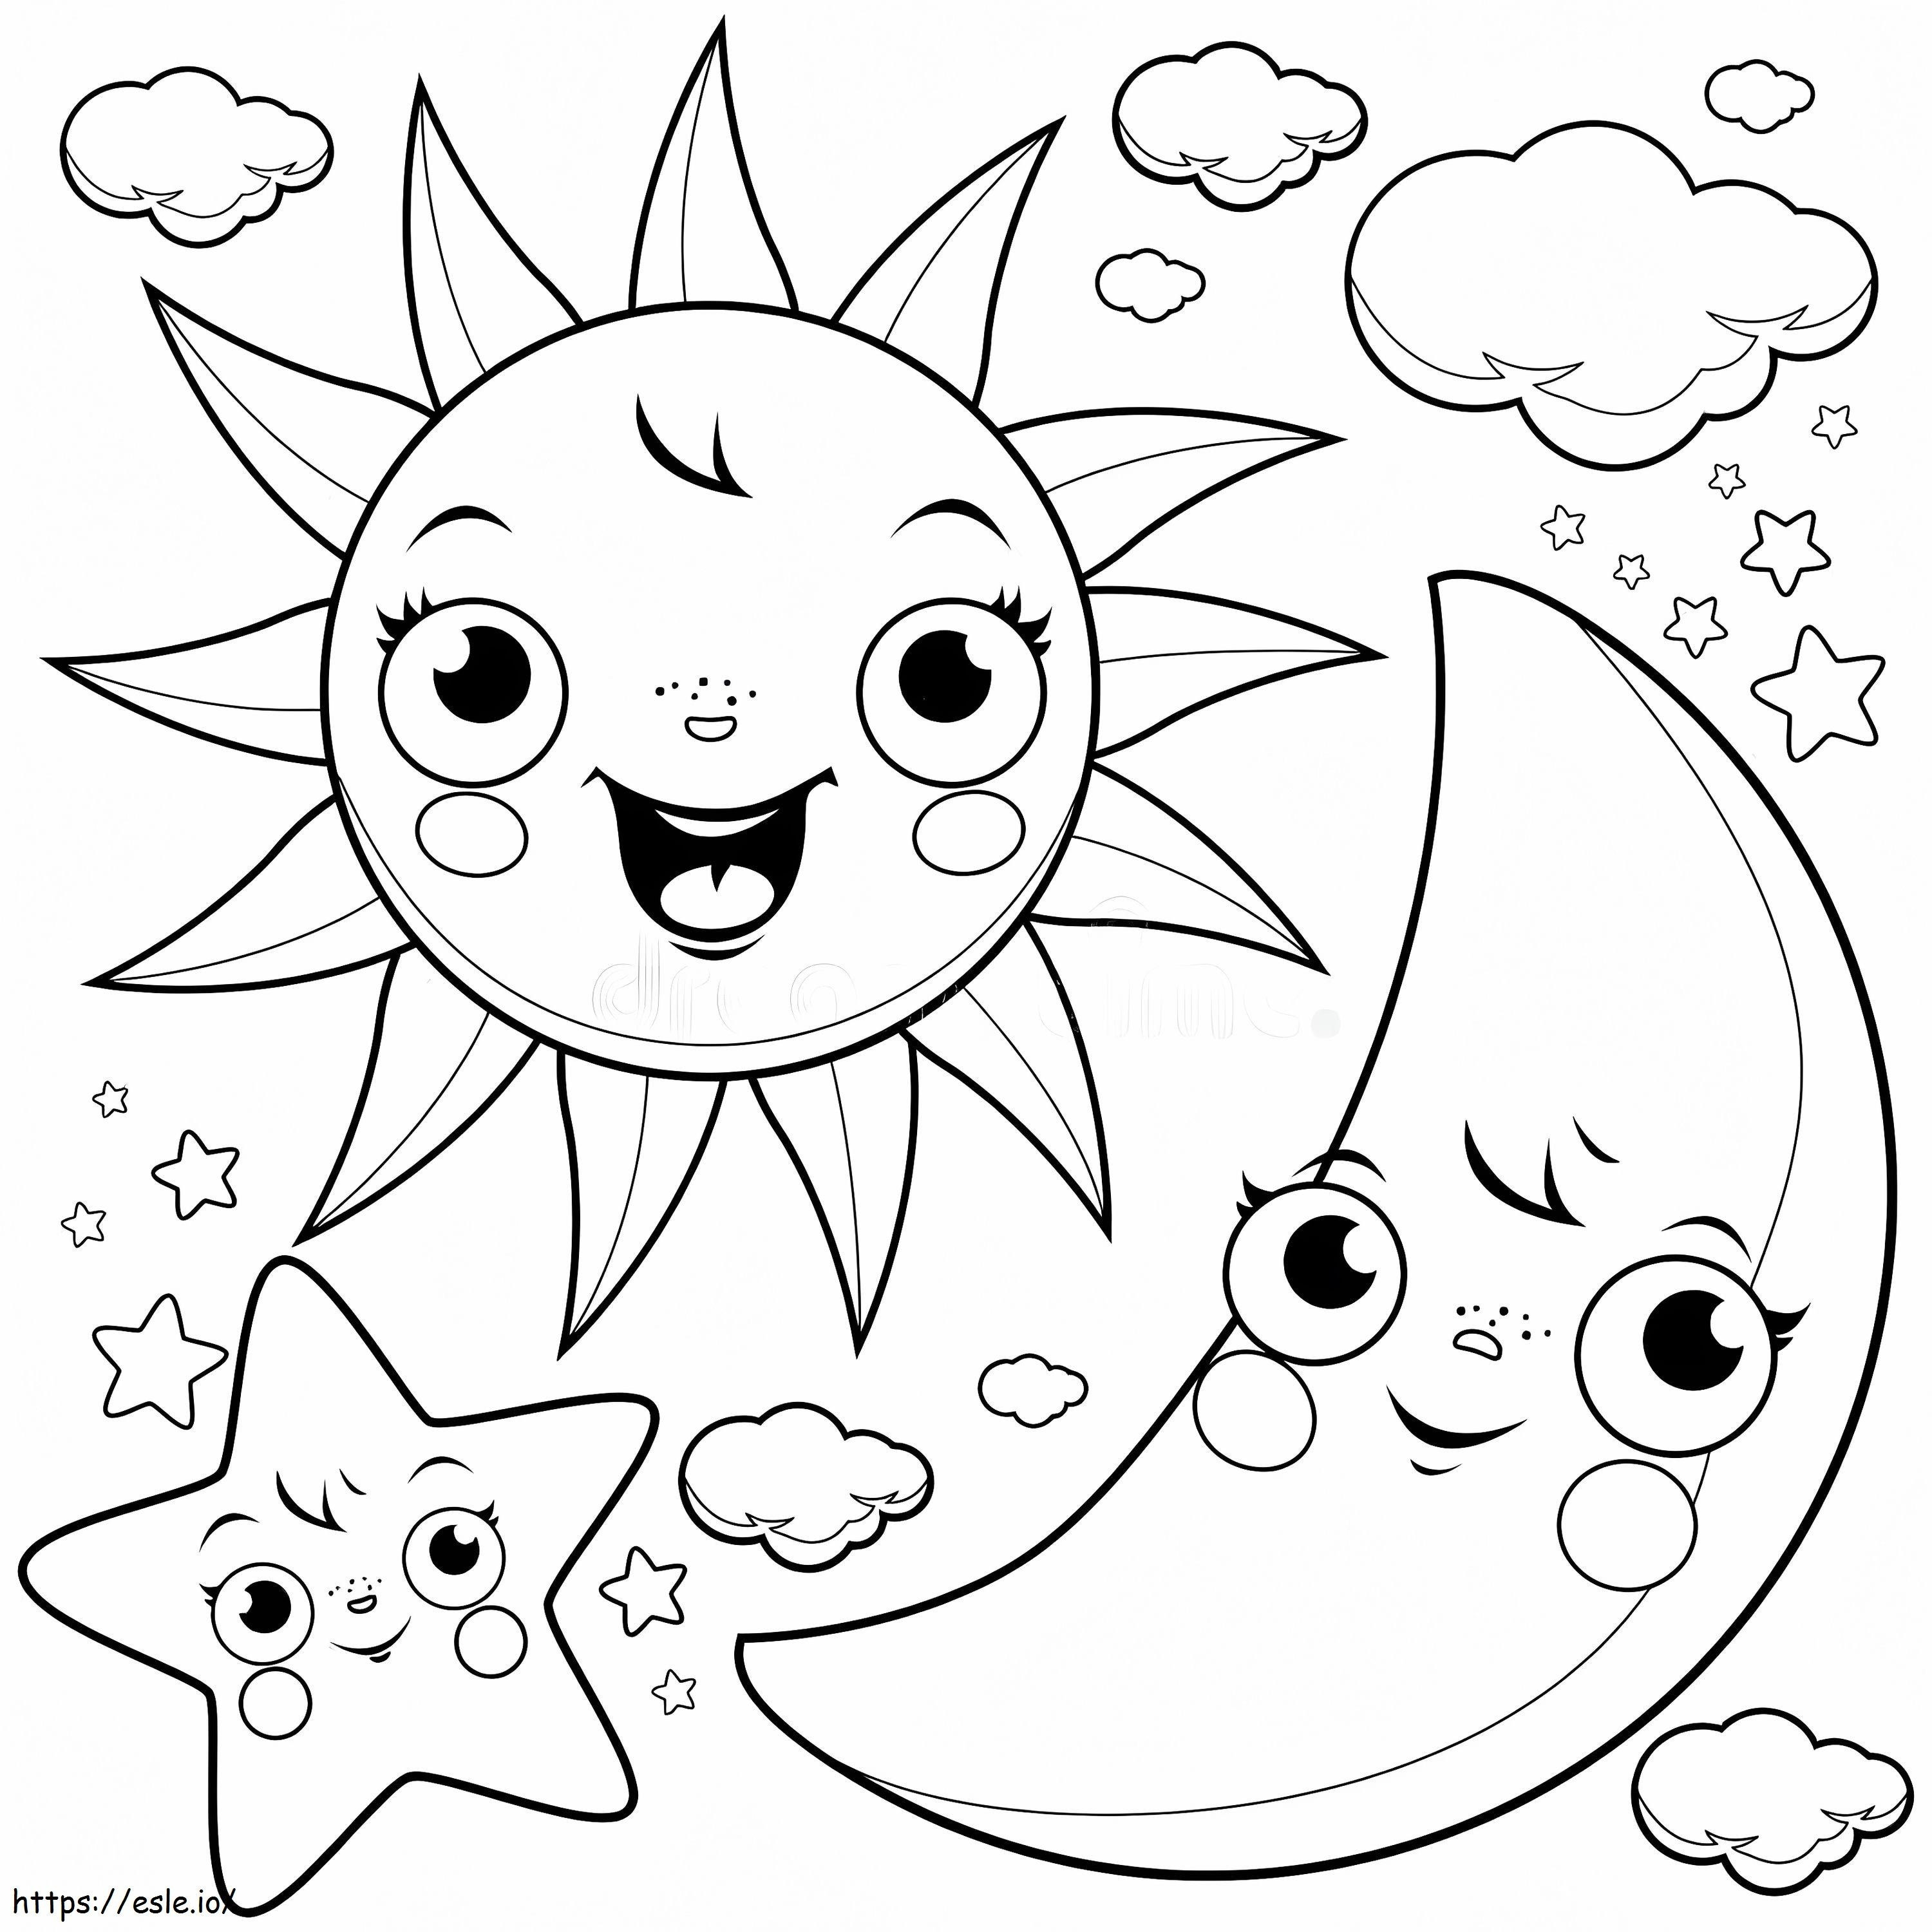 Cartoon Sun And Moon With Stars coloring page